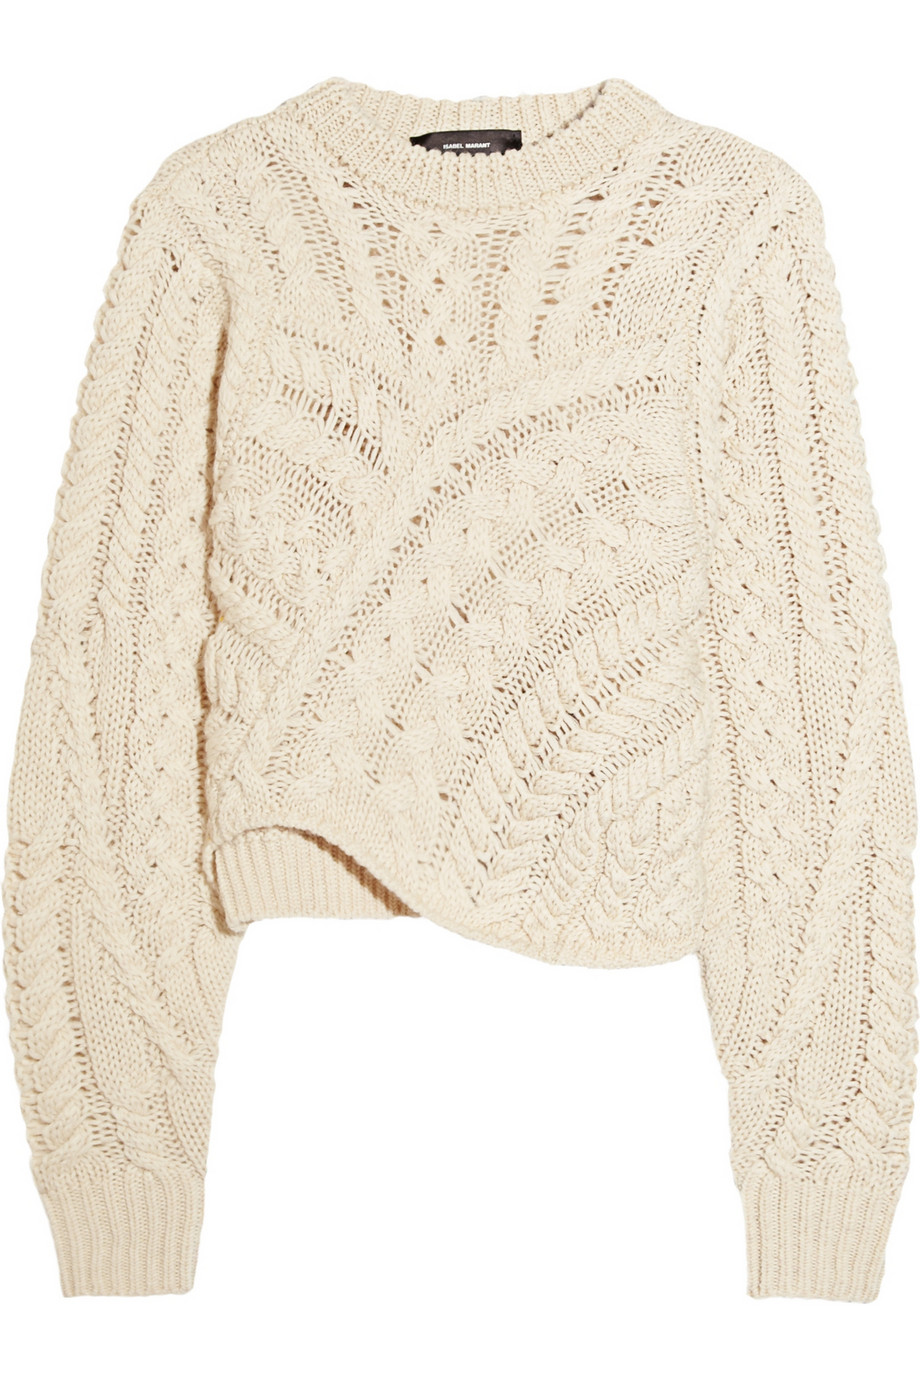 Isabel Marant Versus Cableknit Wool Sweater in Cream (Natural) - Lyst